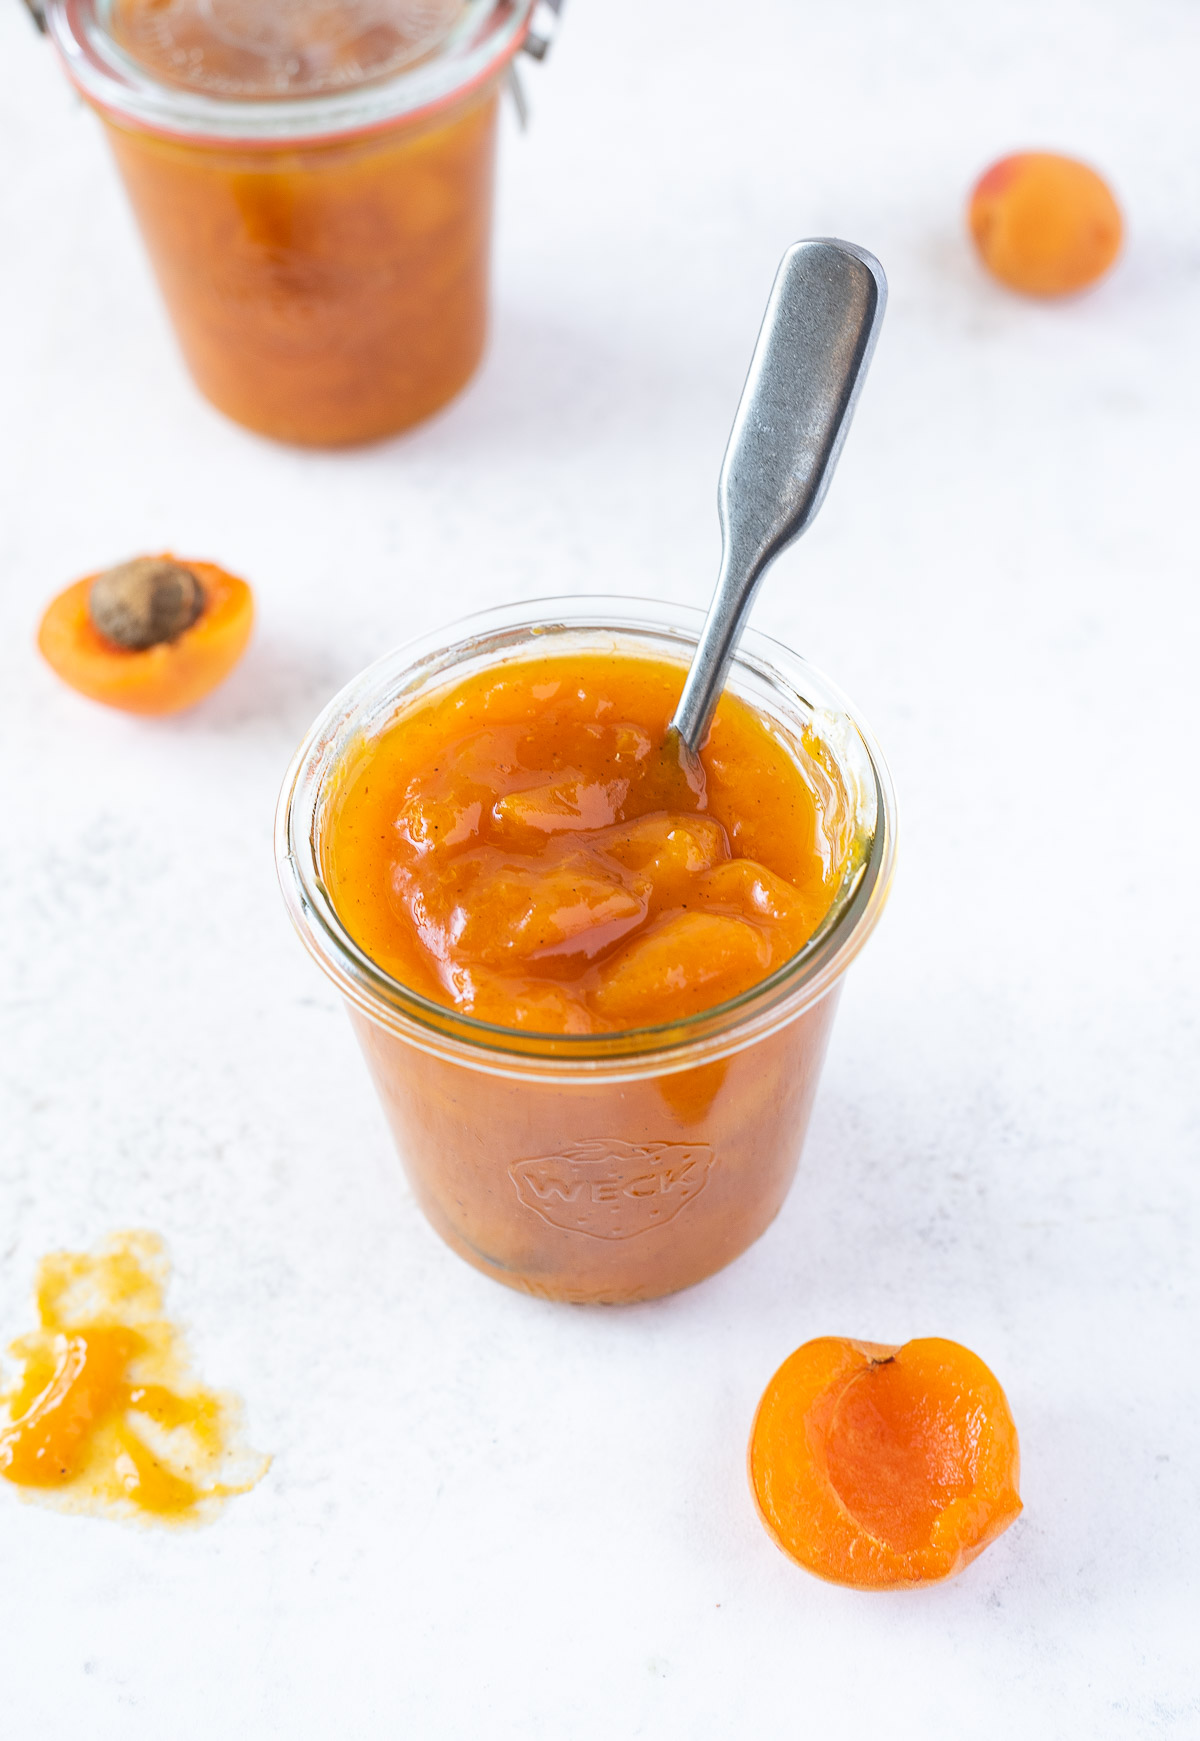 jar of apricot jam with spoon buried into the center